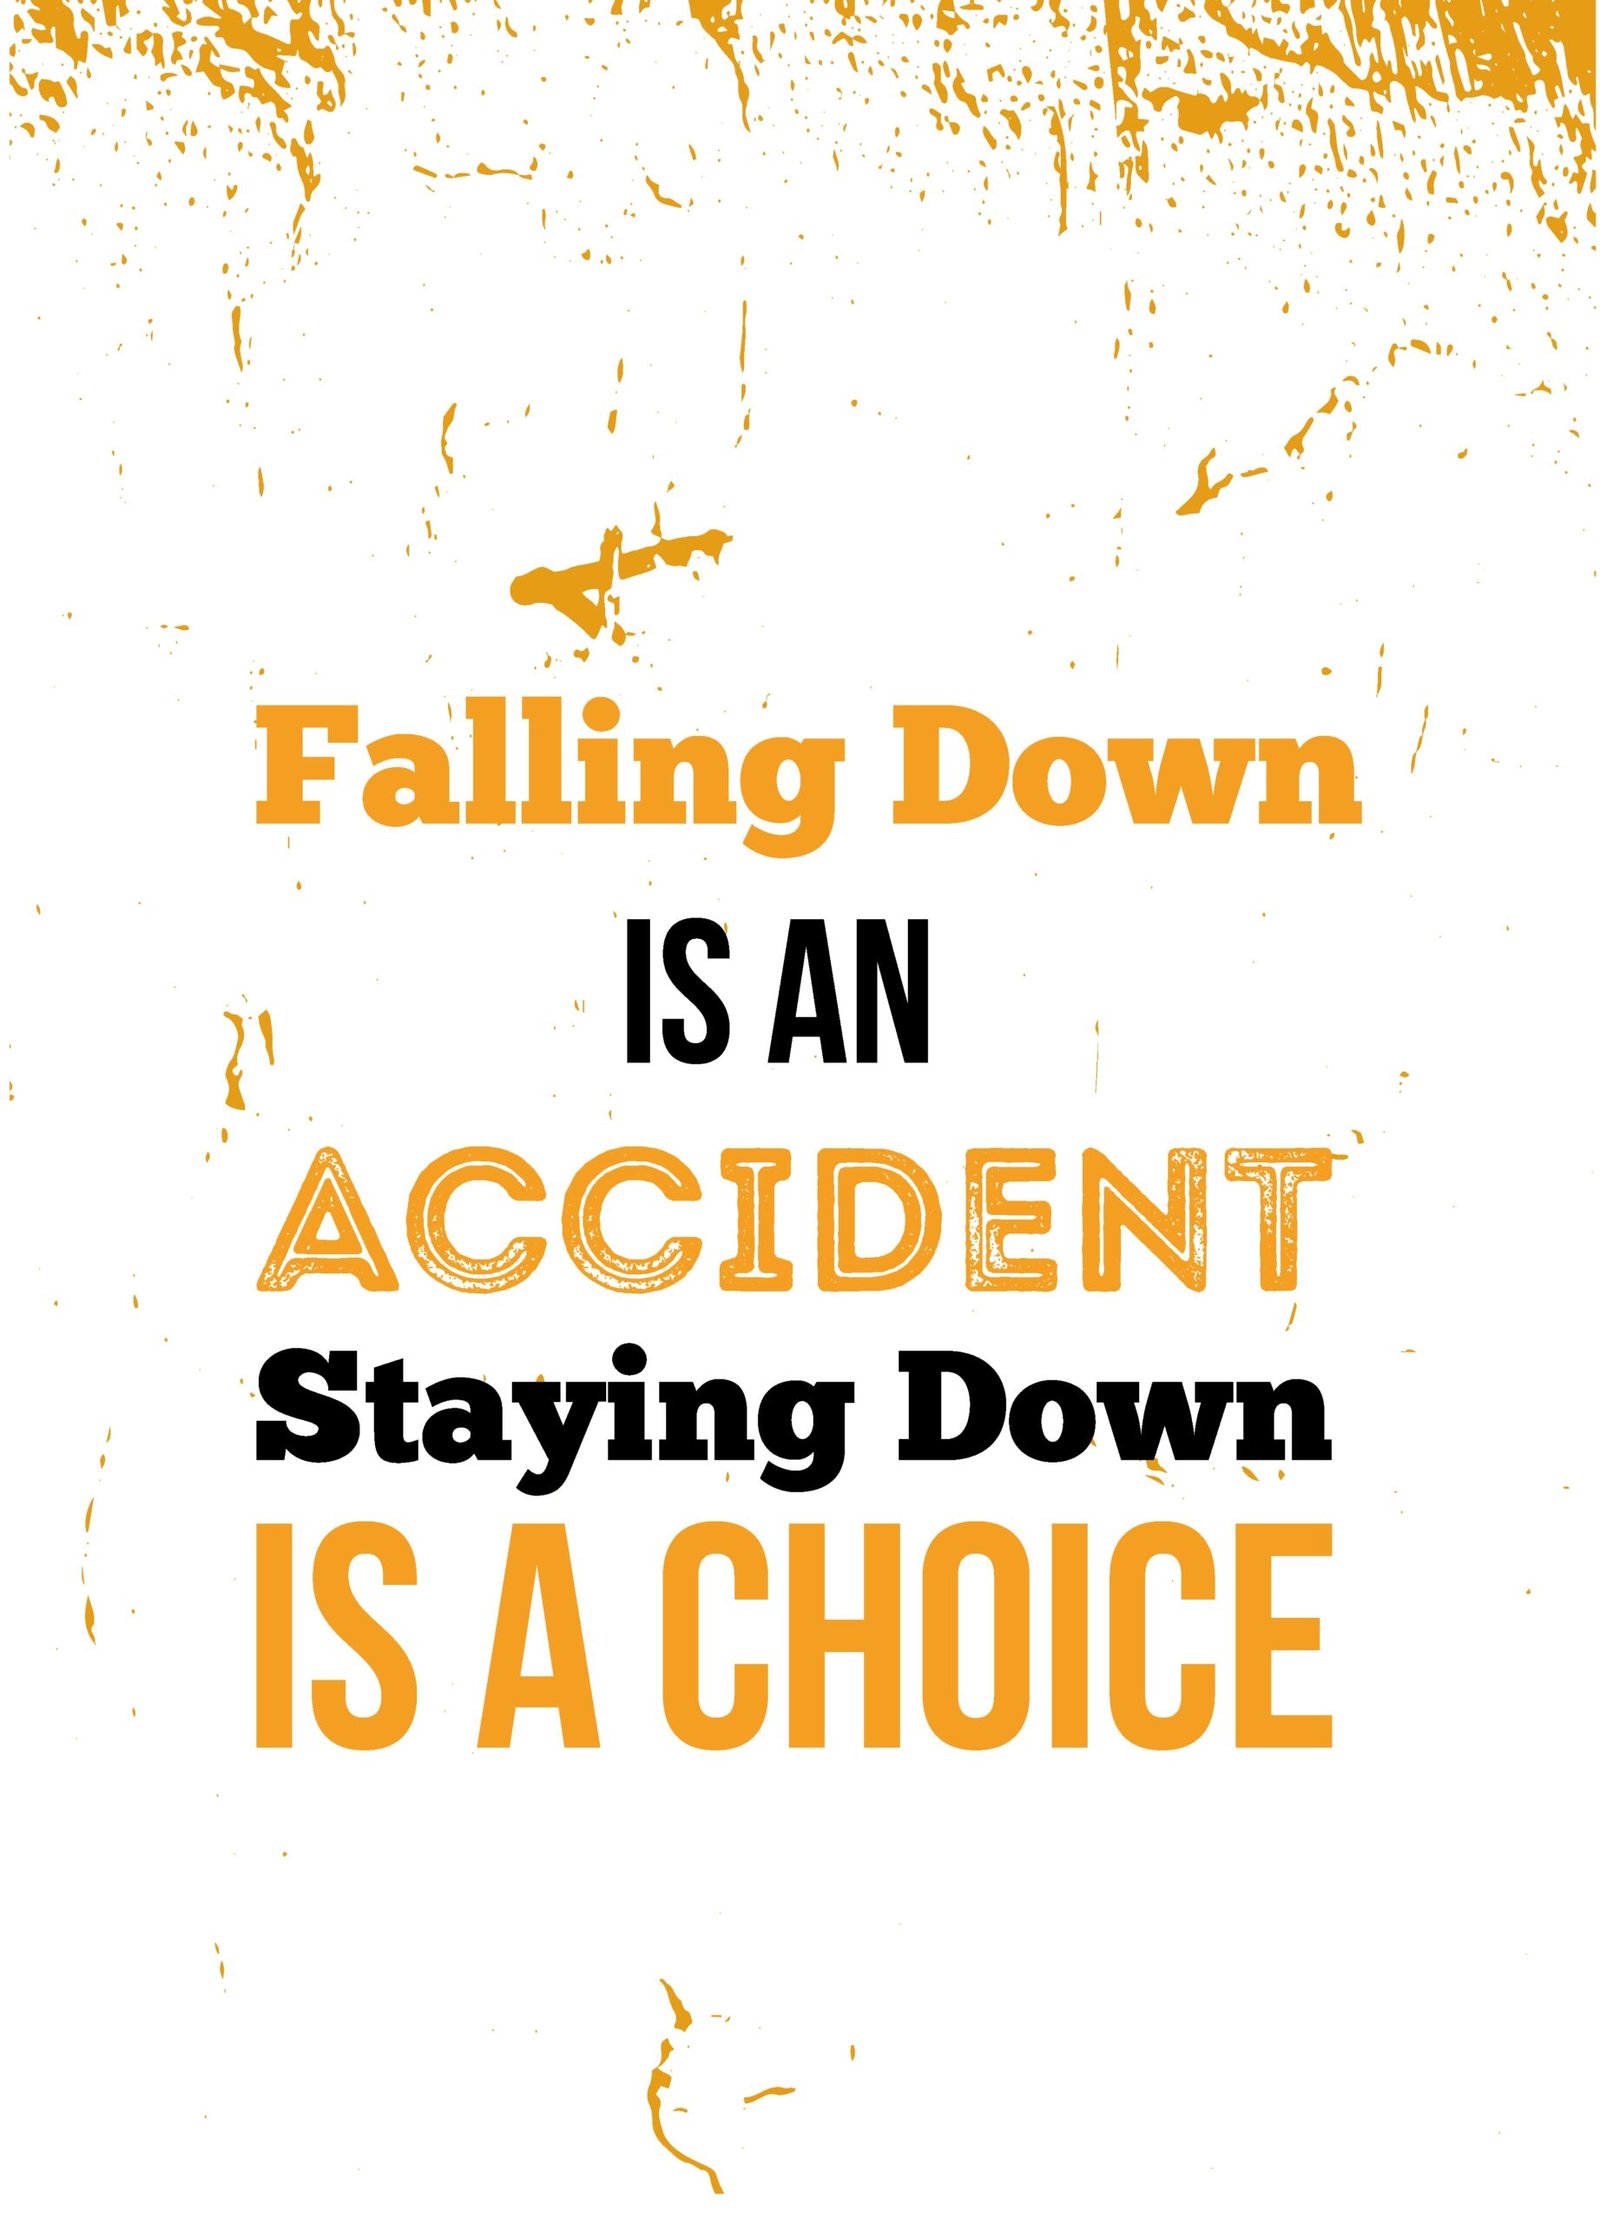 Falling down is an accident